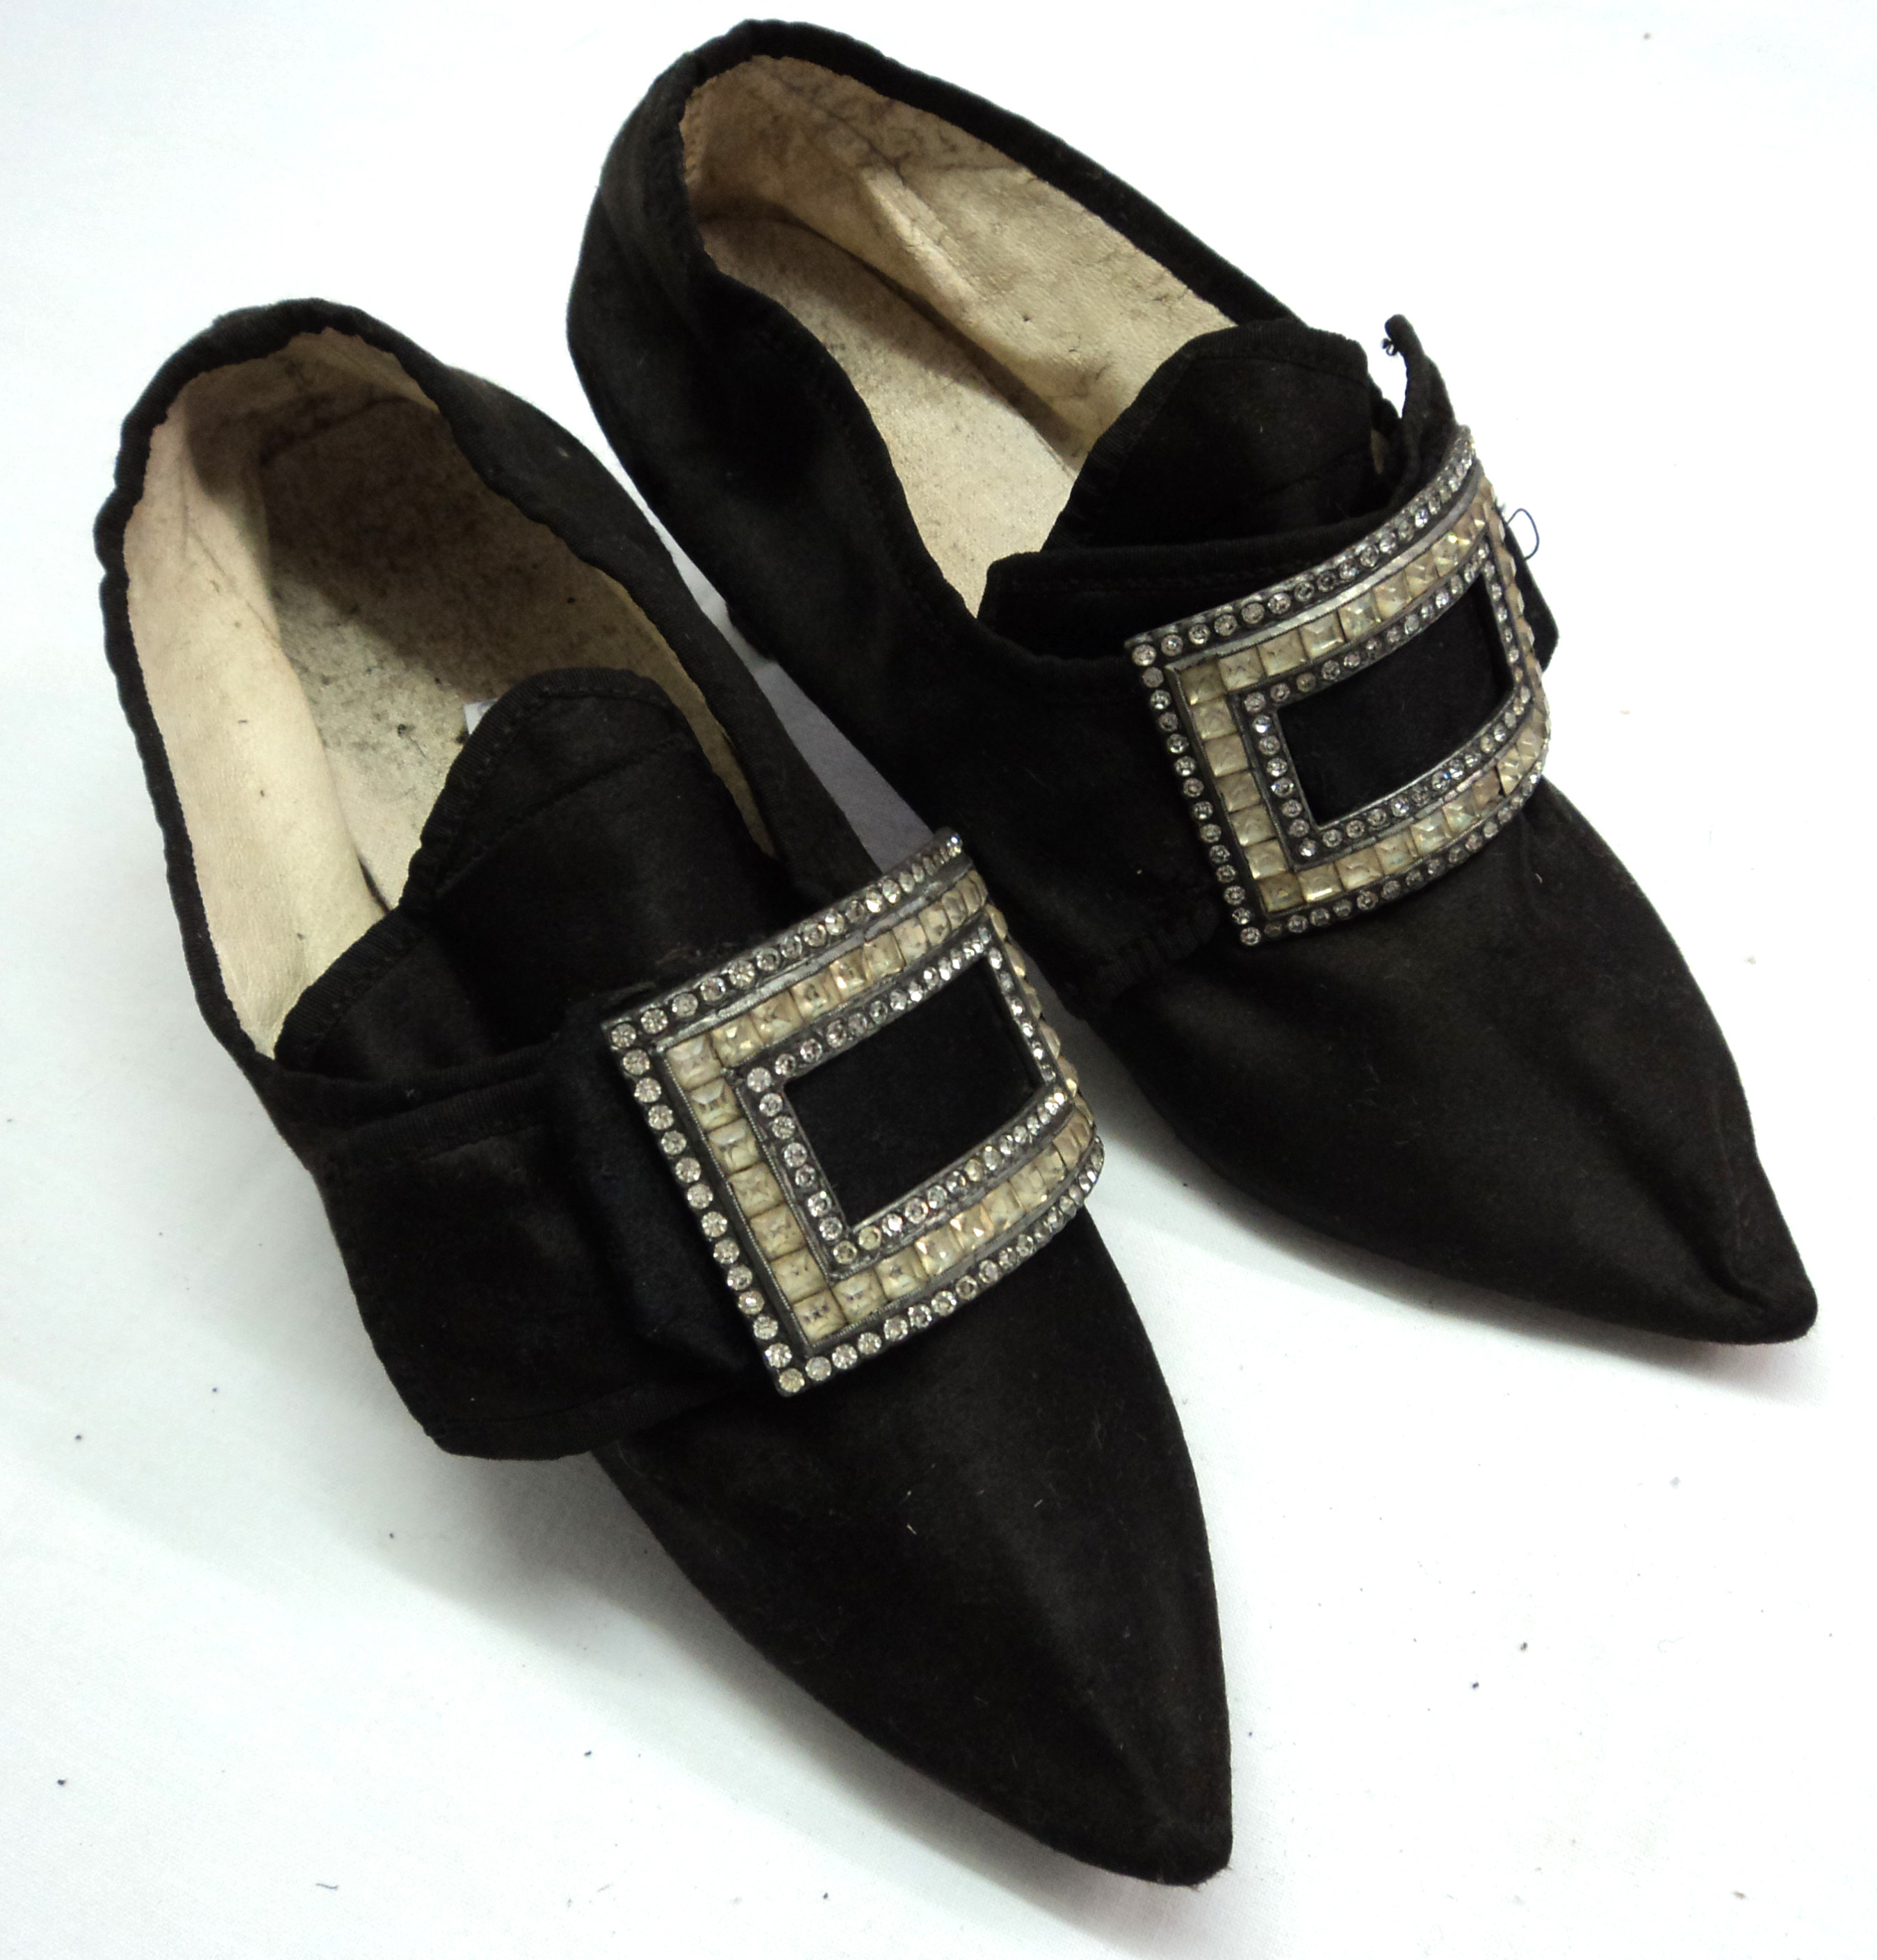 A collection of vintage ladies decorative evening shoes including leather Mary Janes, etc. - Image 8 of 13